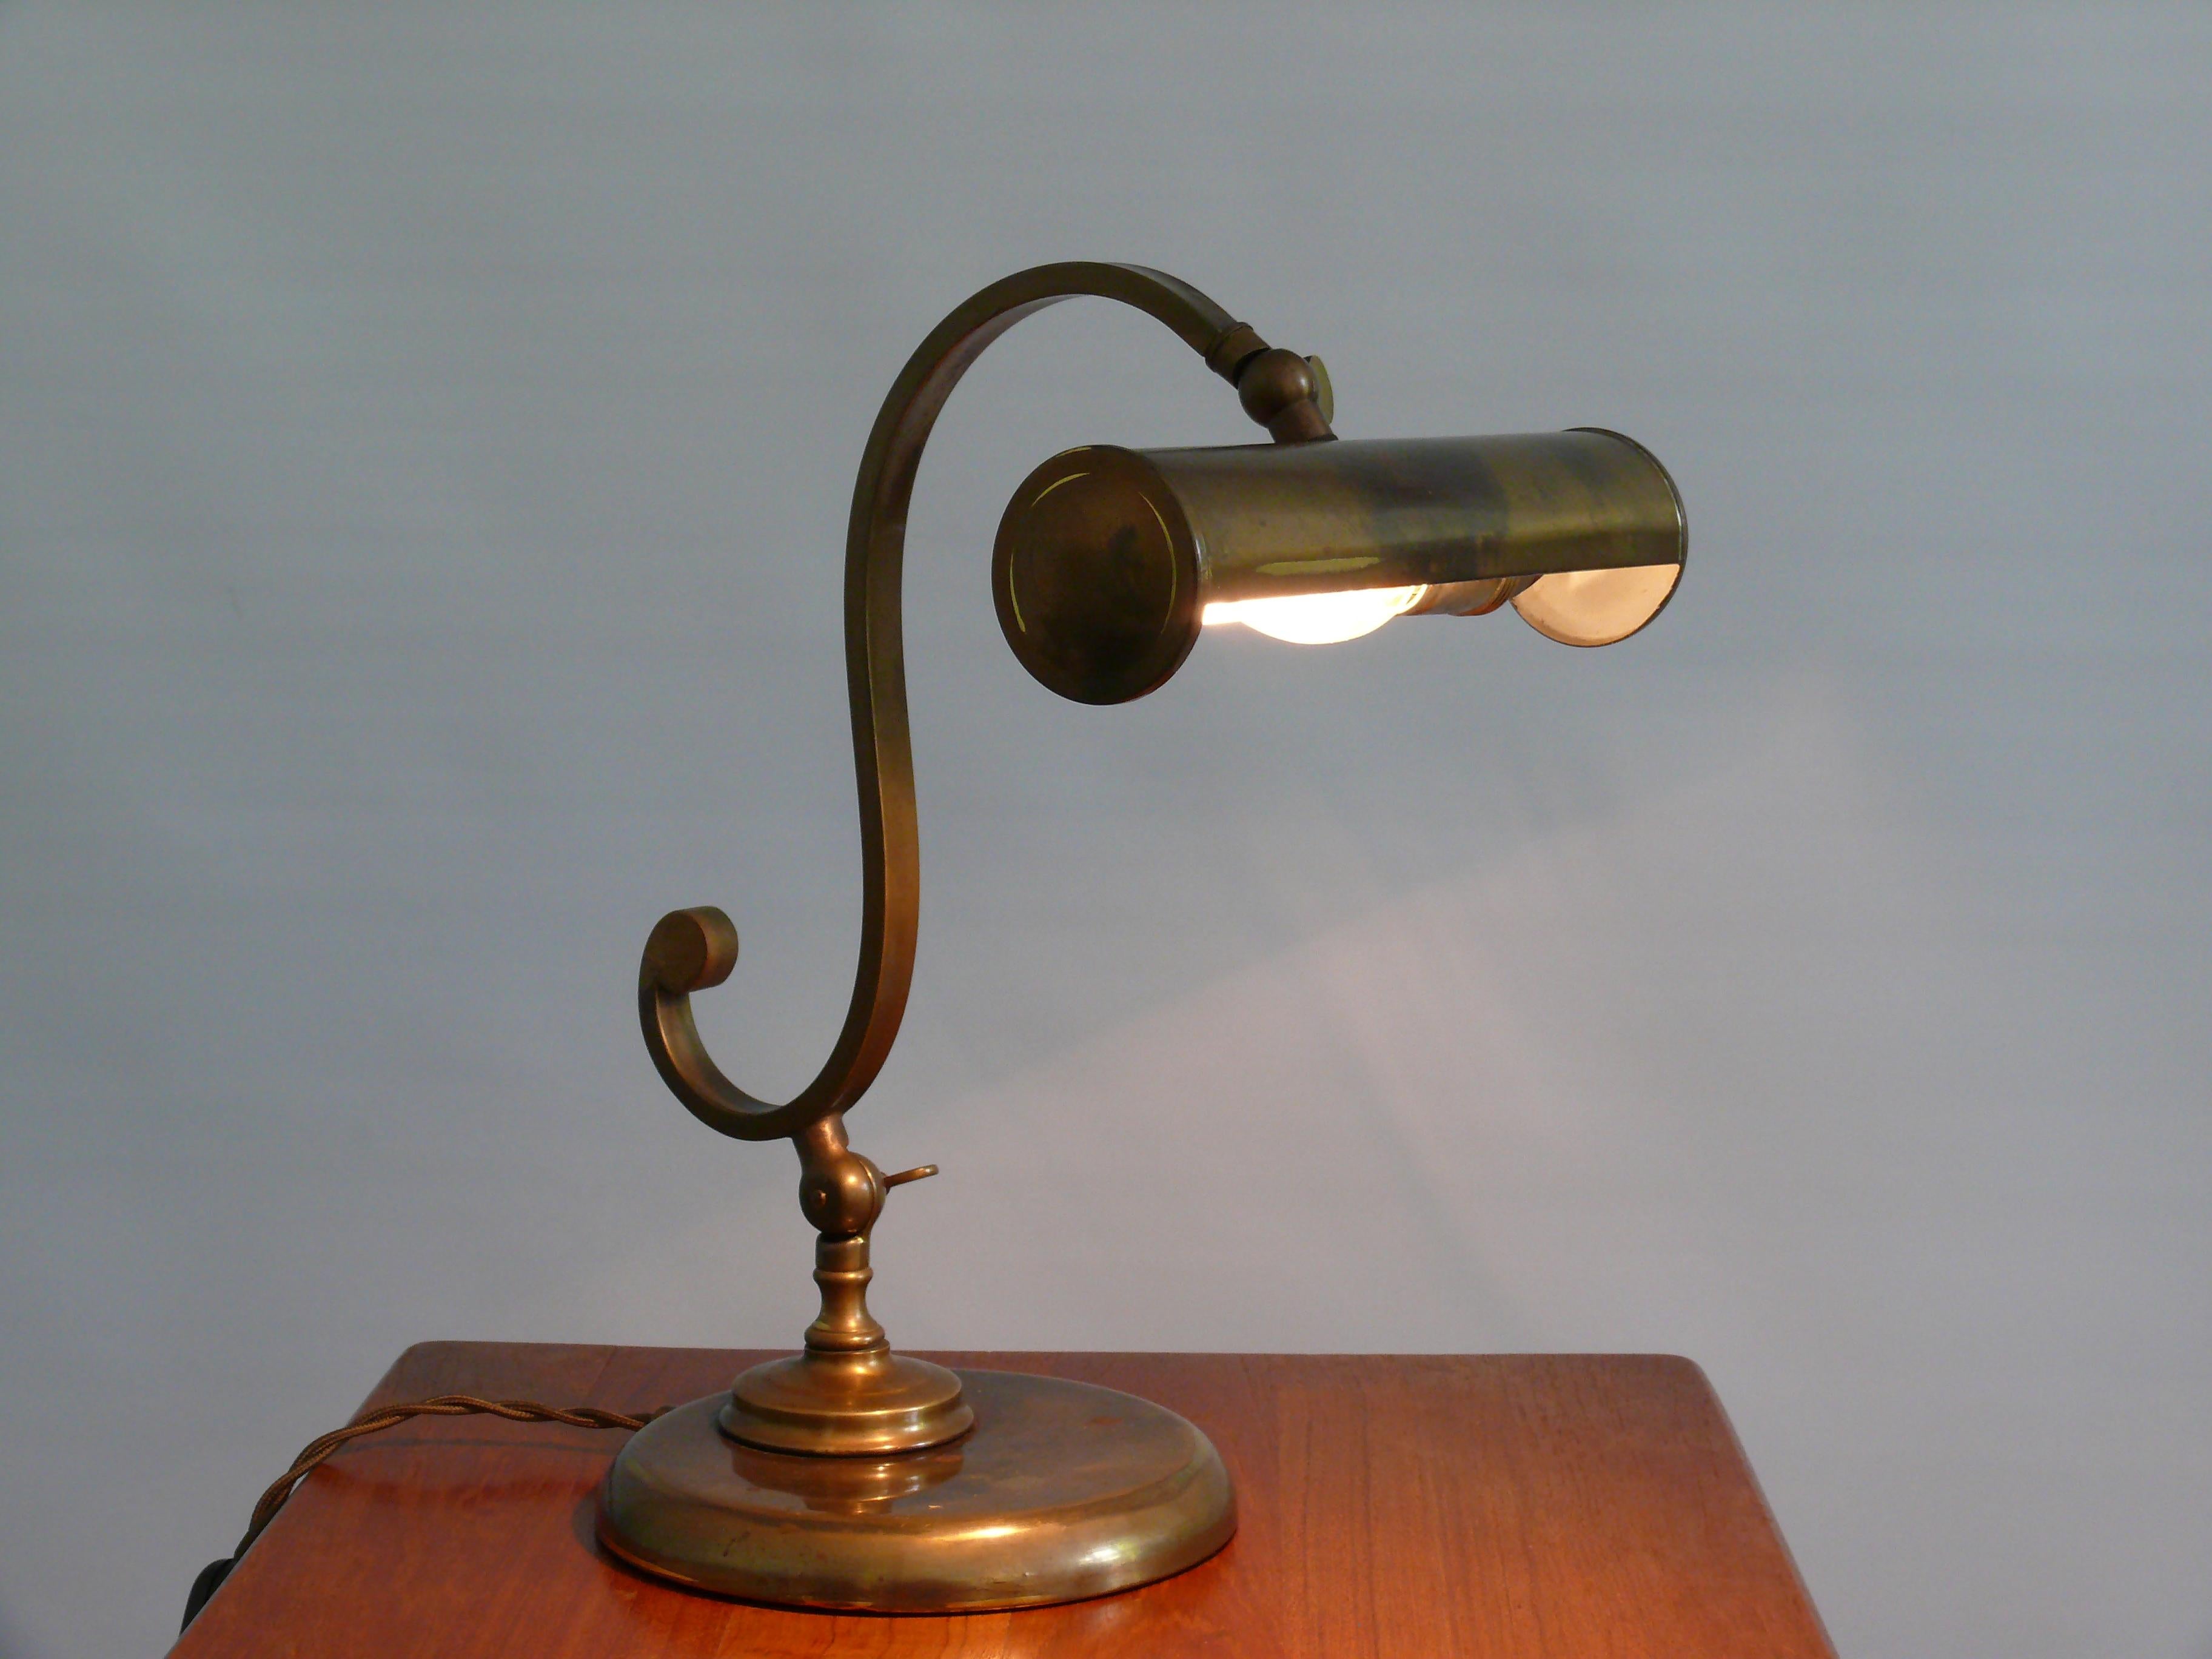 German Midcentury Brass Piano Lamp, 1950s For Sale